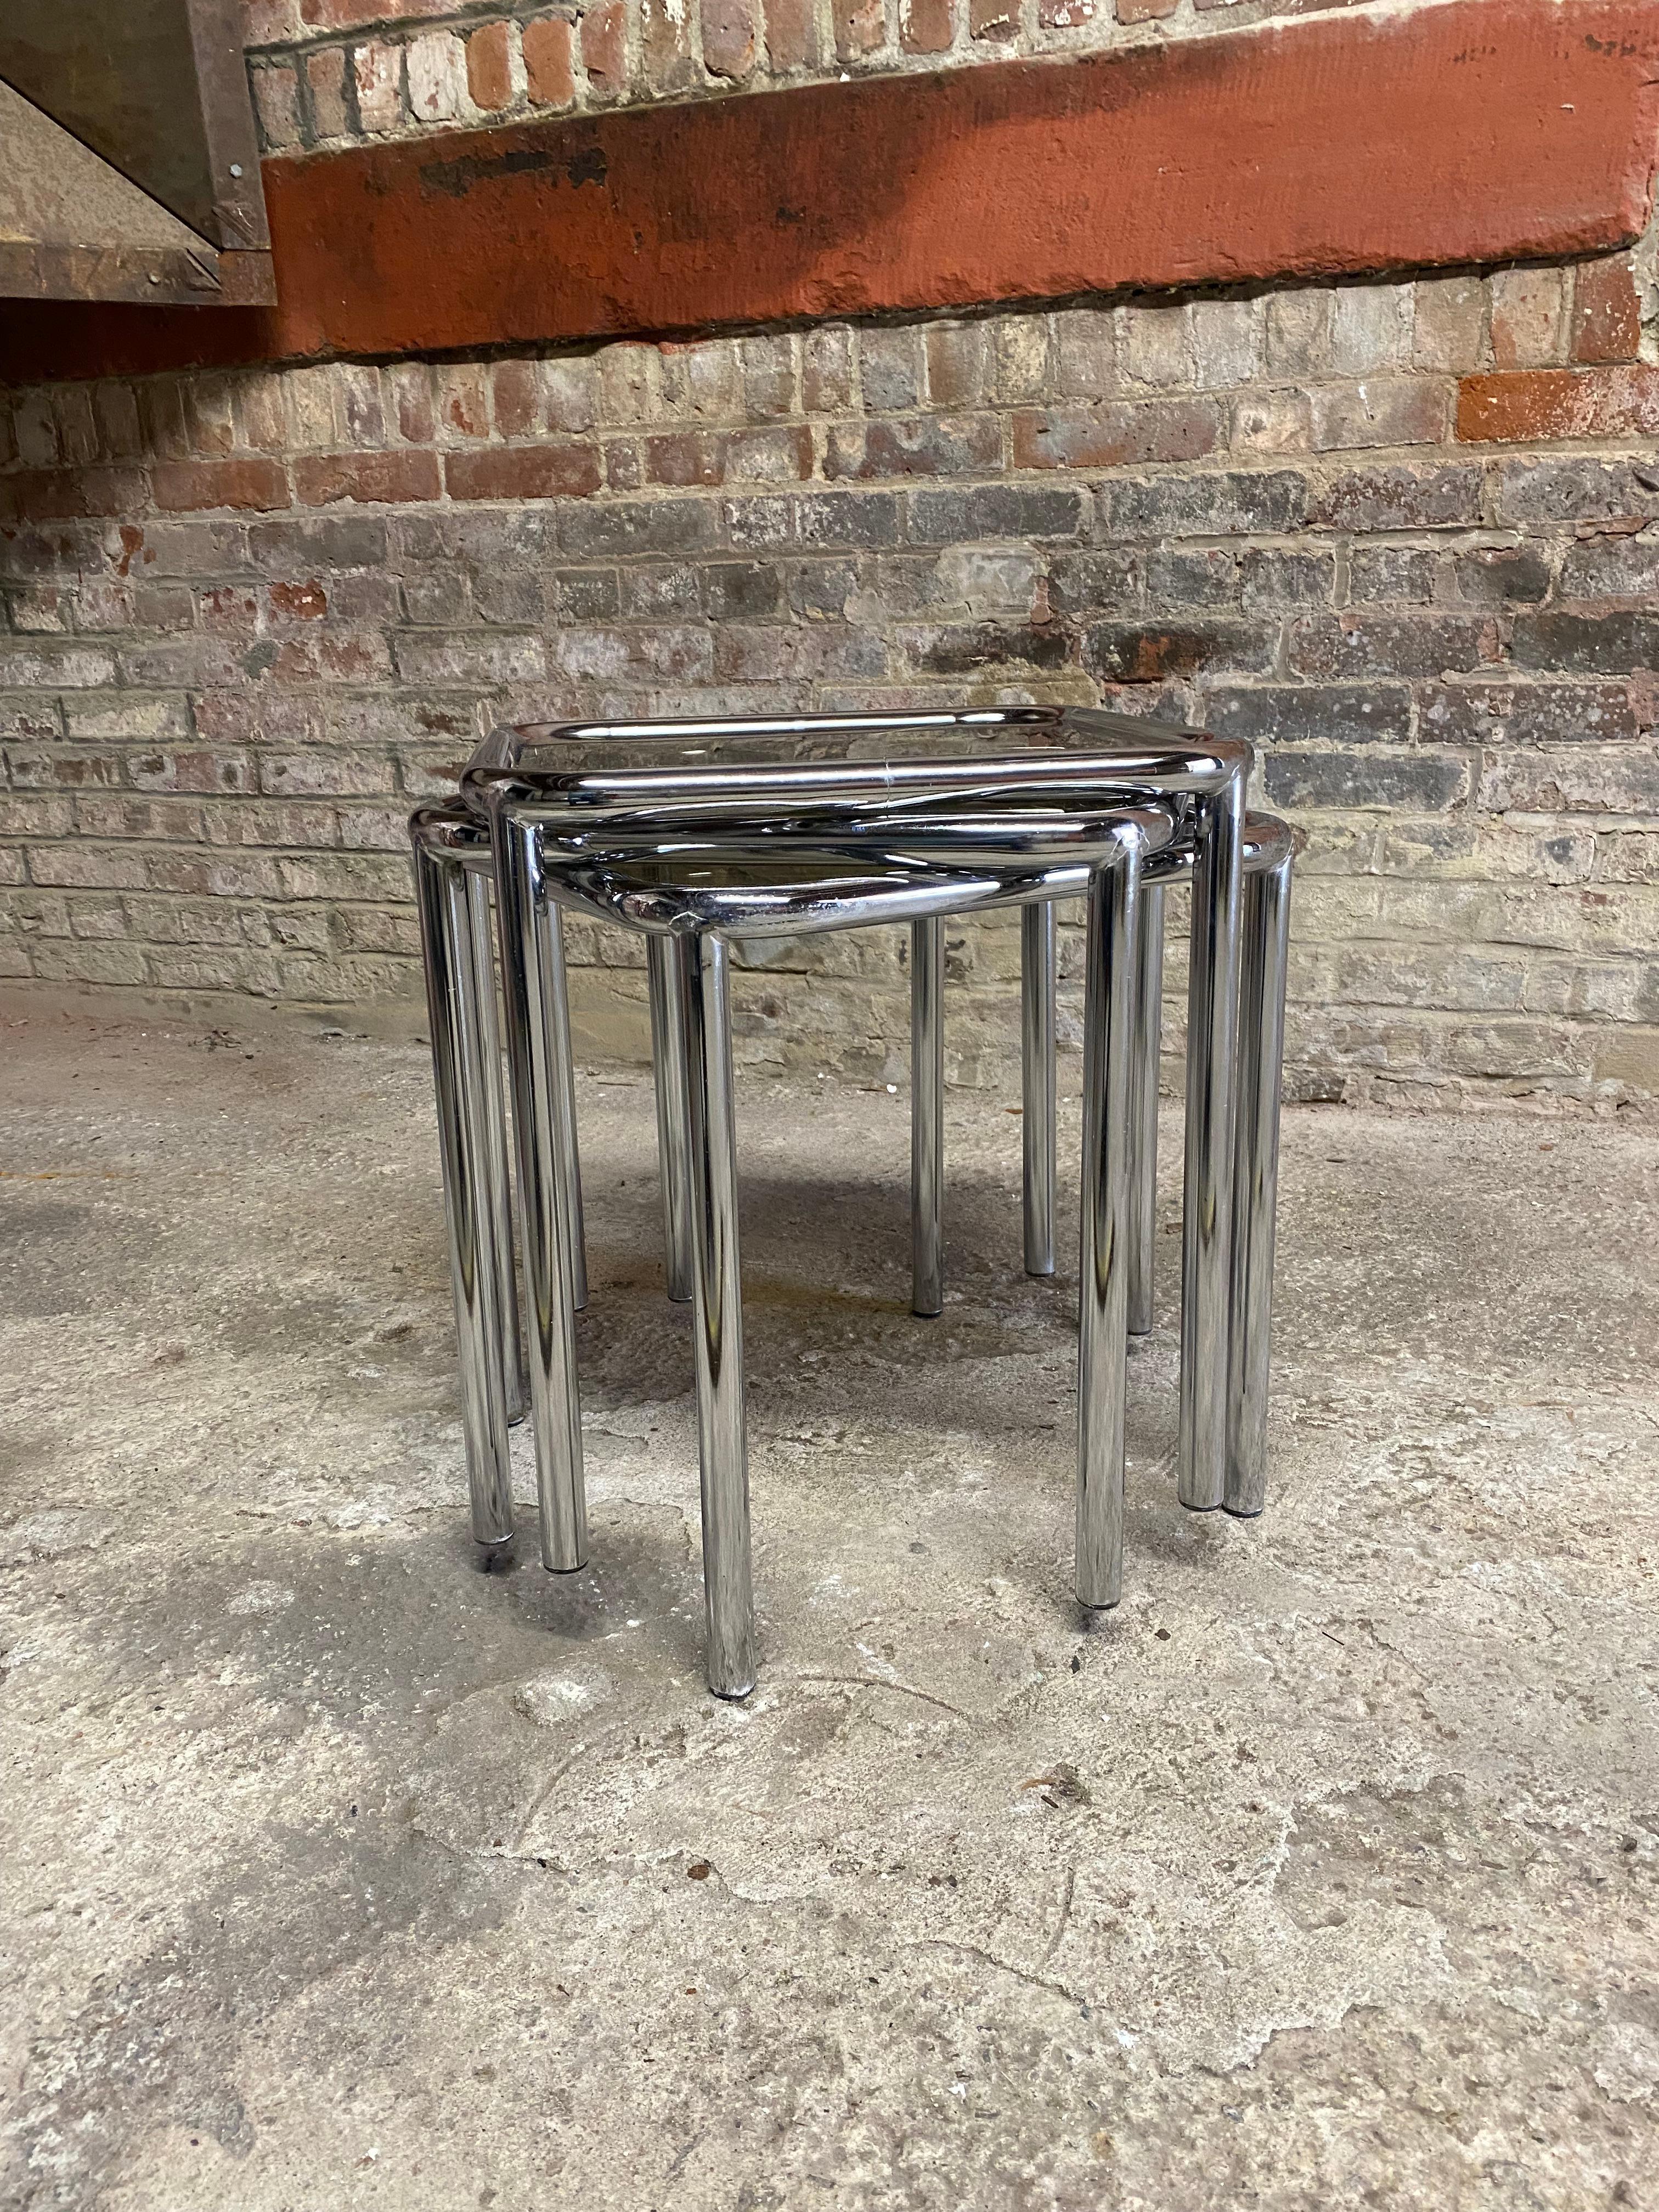 Chrome and Glass Nesting Tables by Arthur Umanoff for The Ansley Collection 1